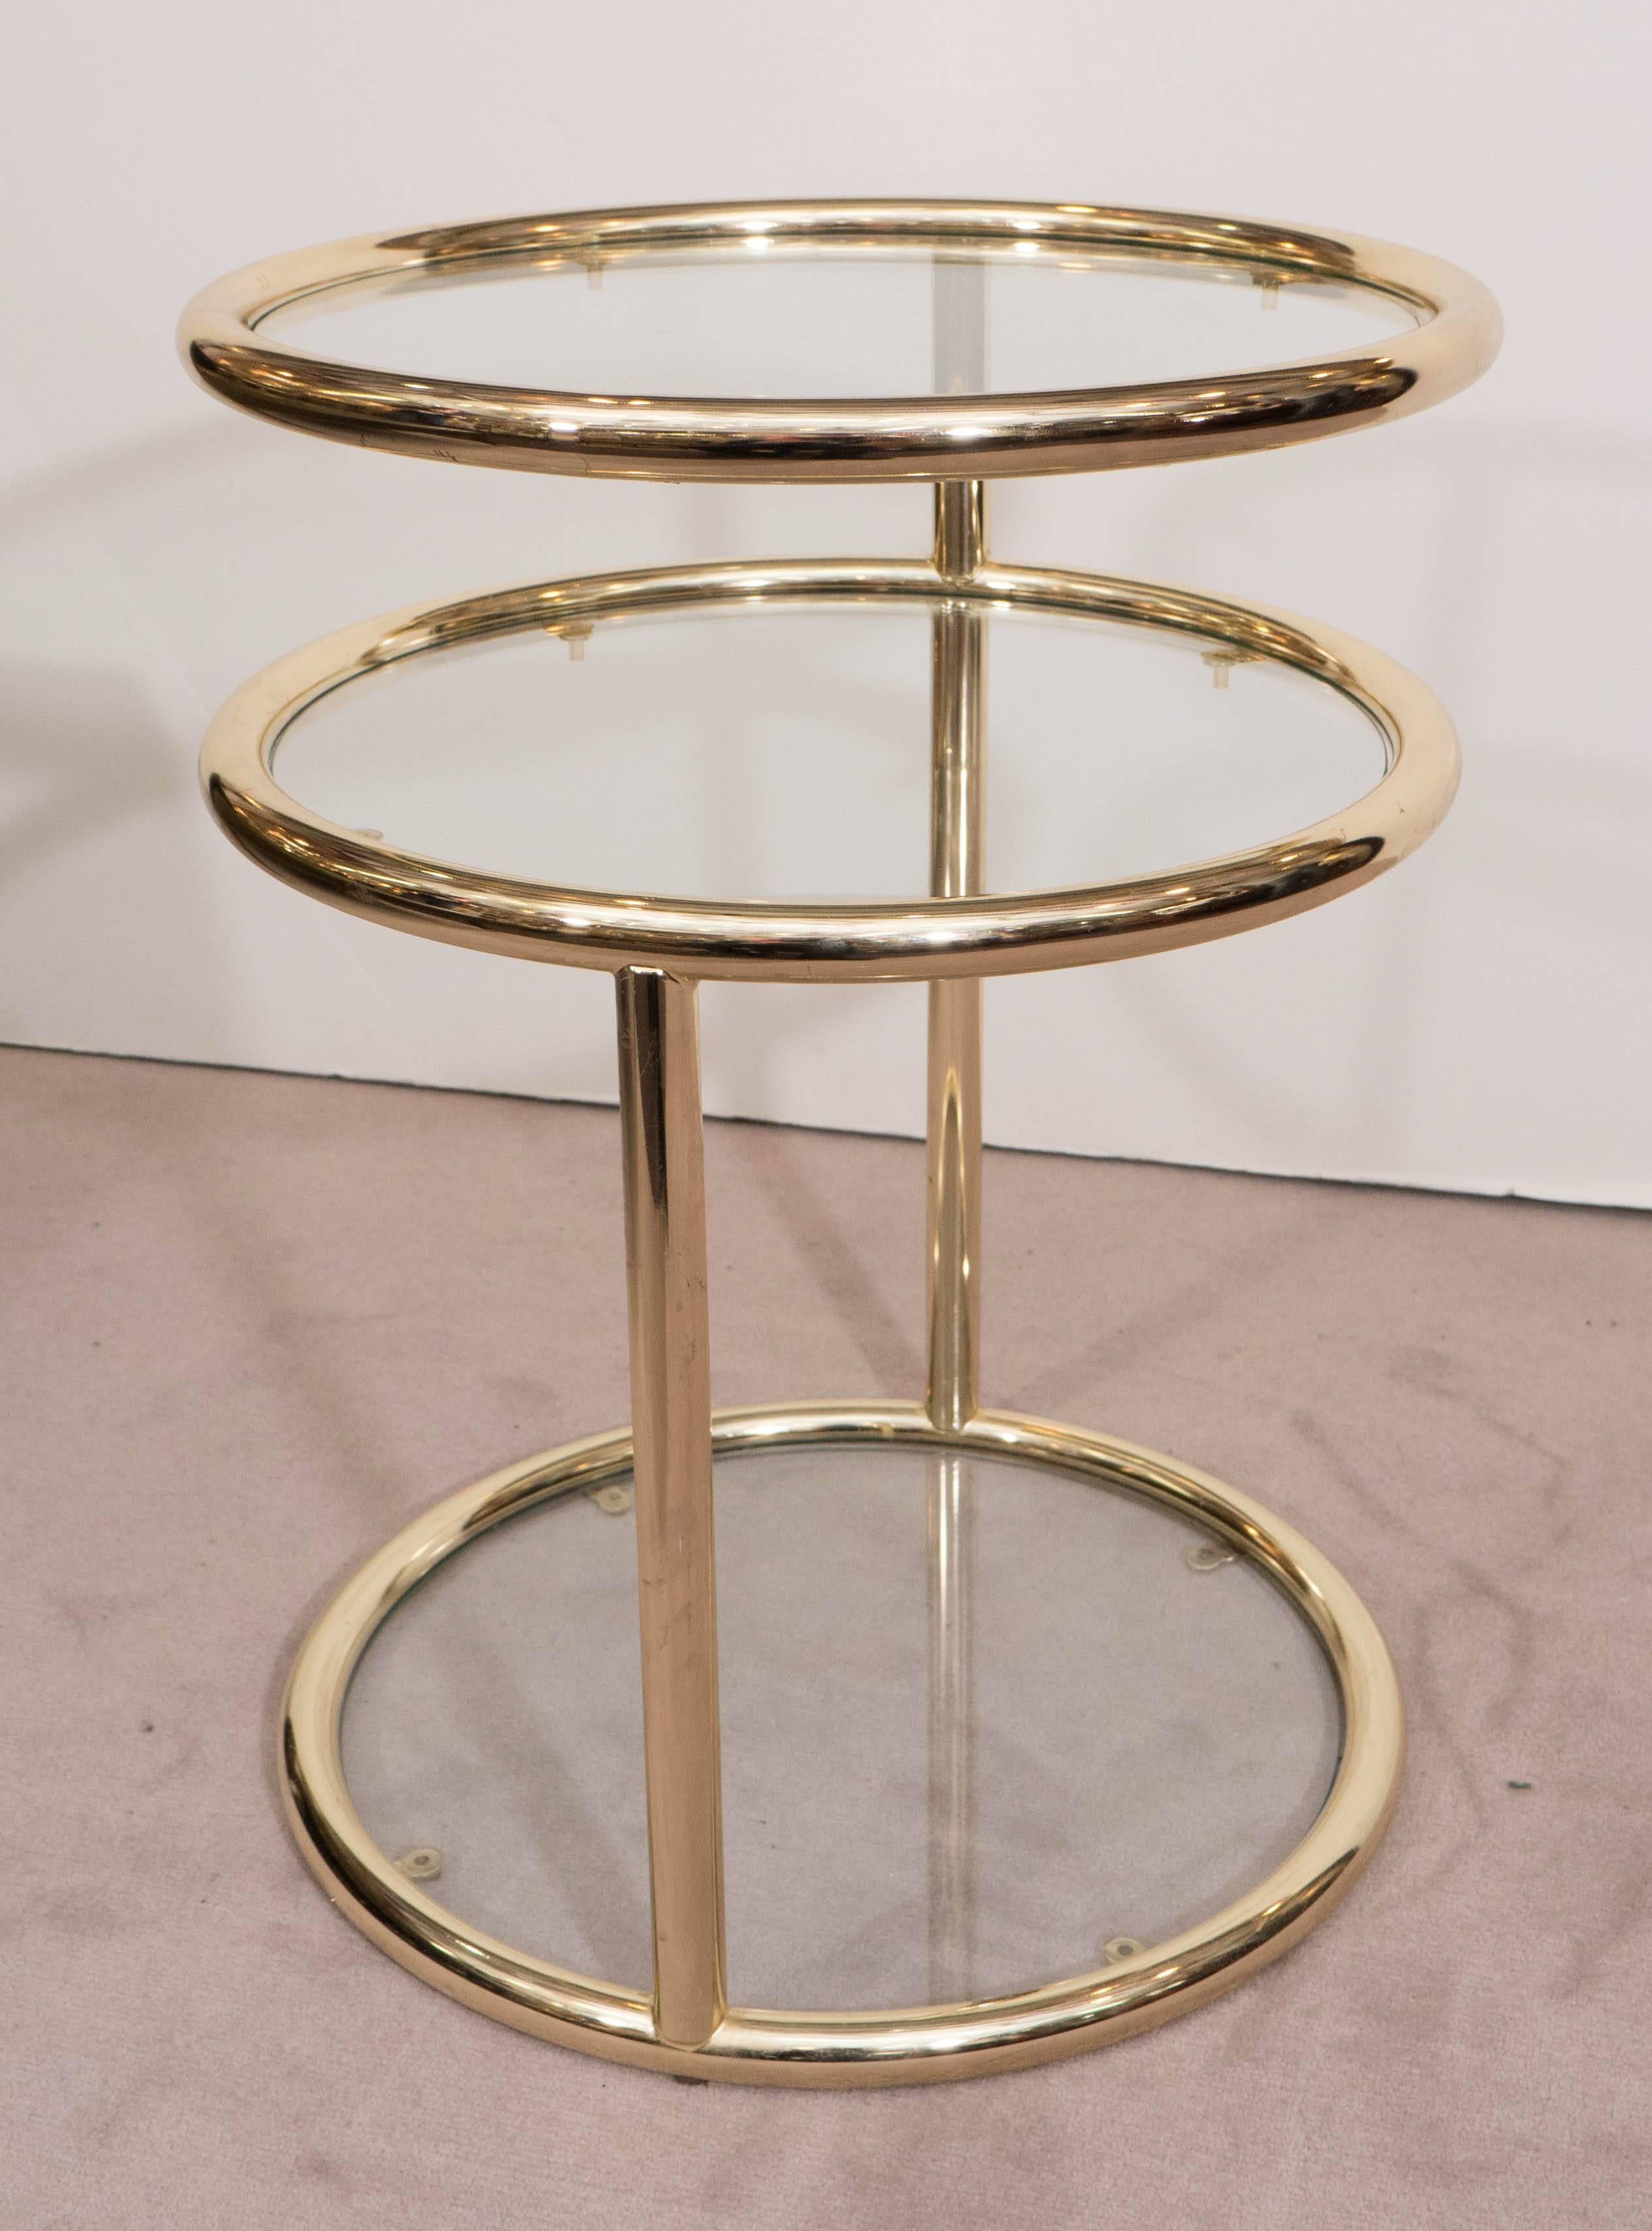 Round Three-Tier Brass Swivel Table in the Style of Milo Baughman 1